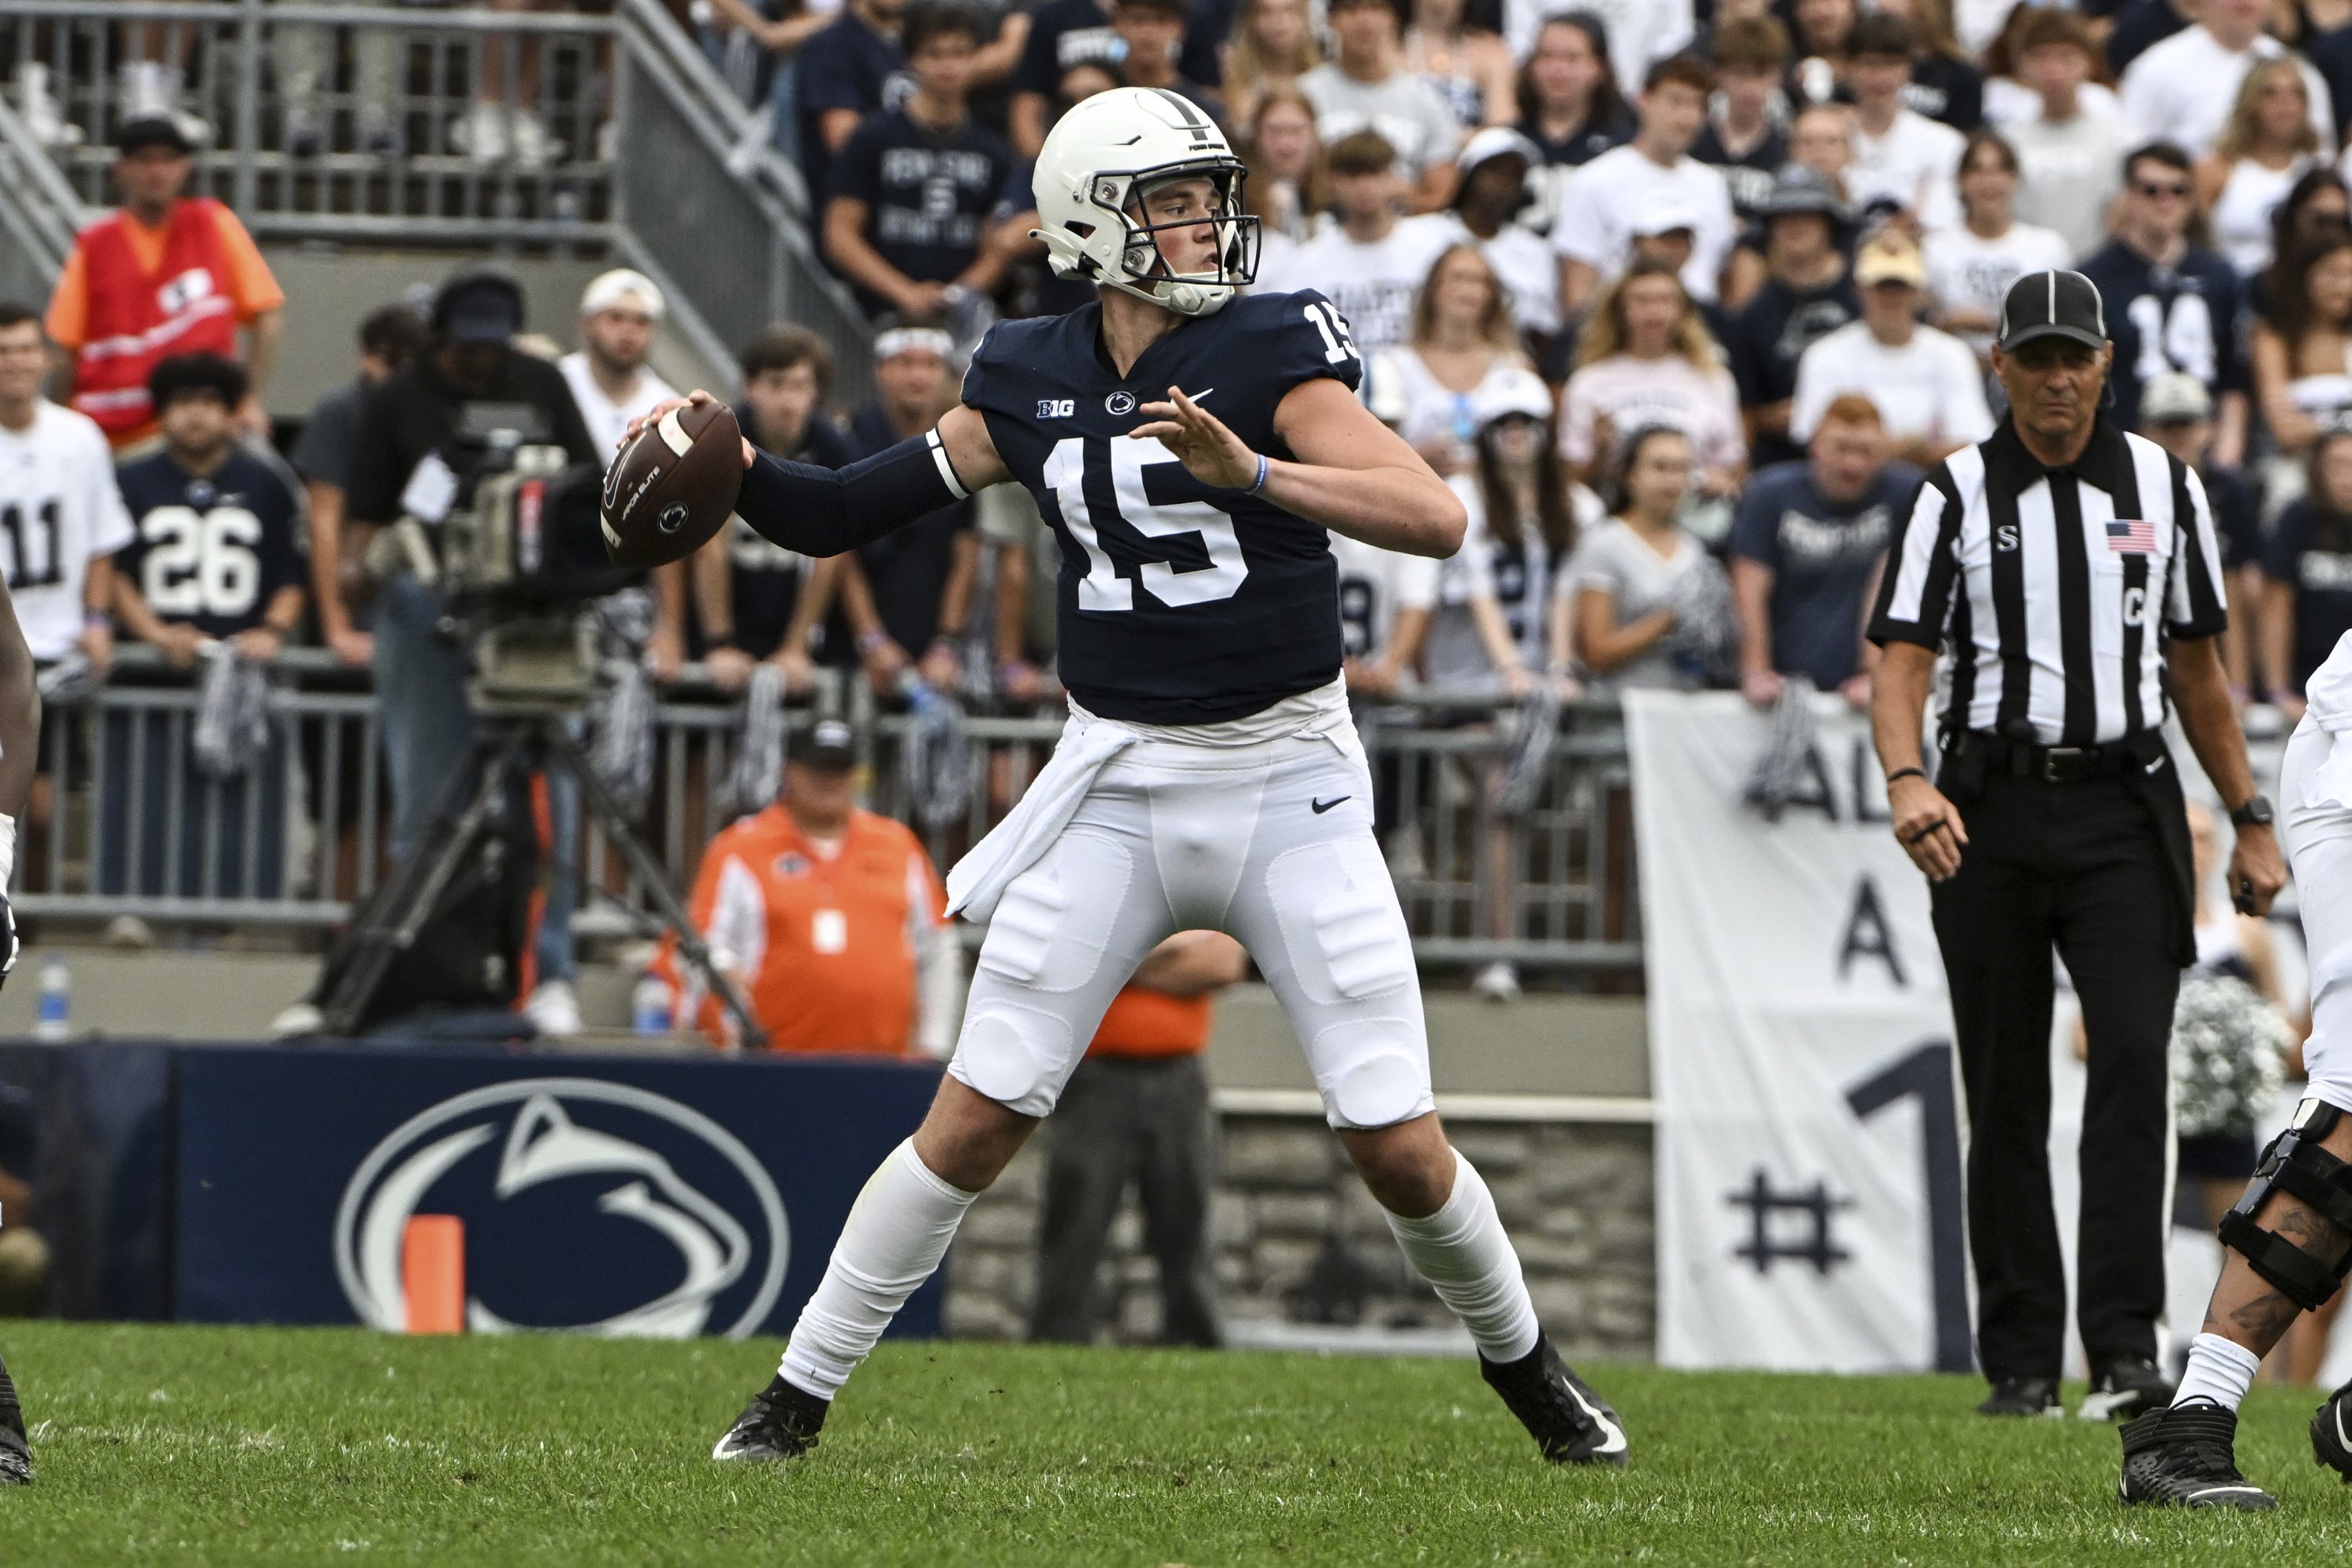 Penn State fans are all in on Drew Allar. Could he be heir apparent at QB?